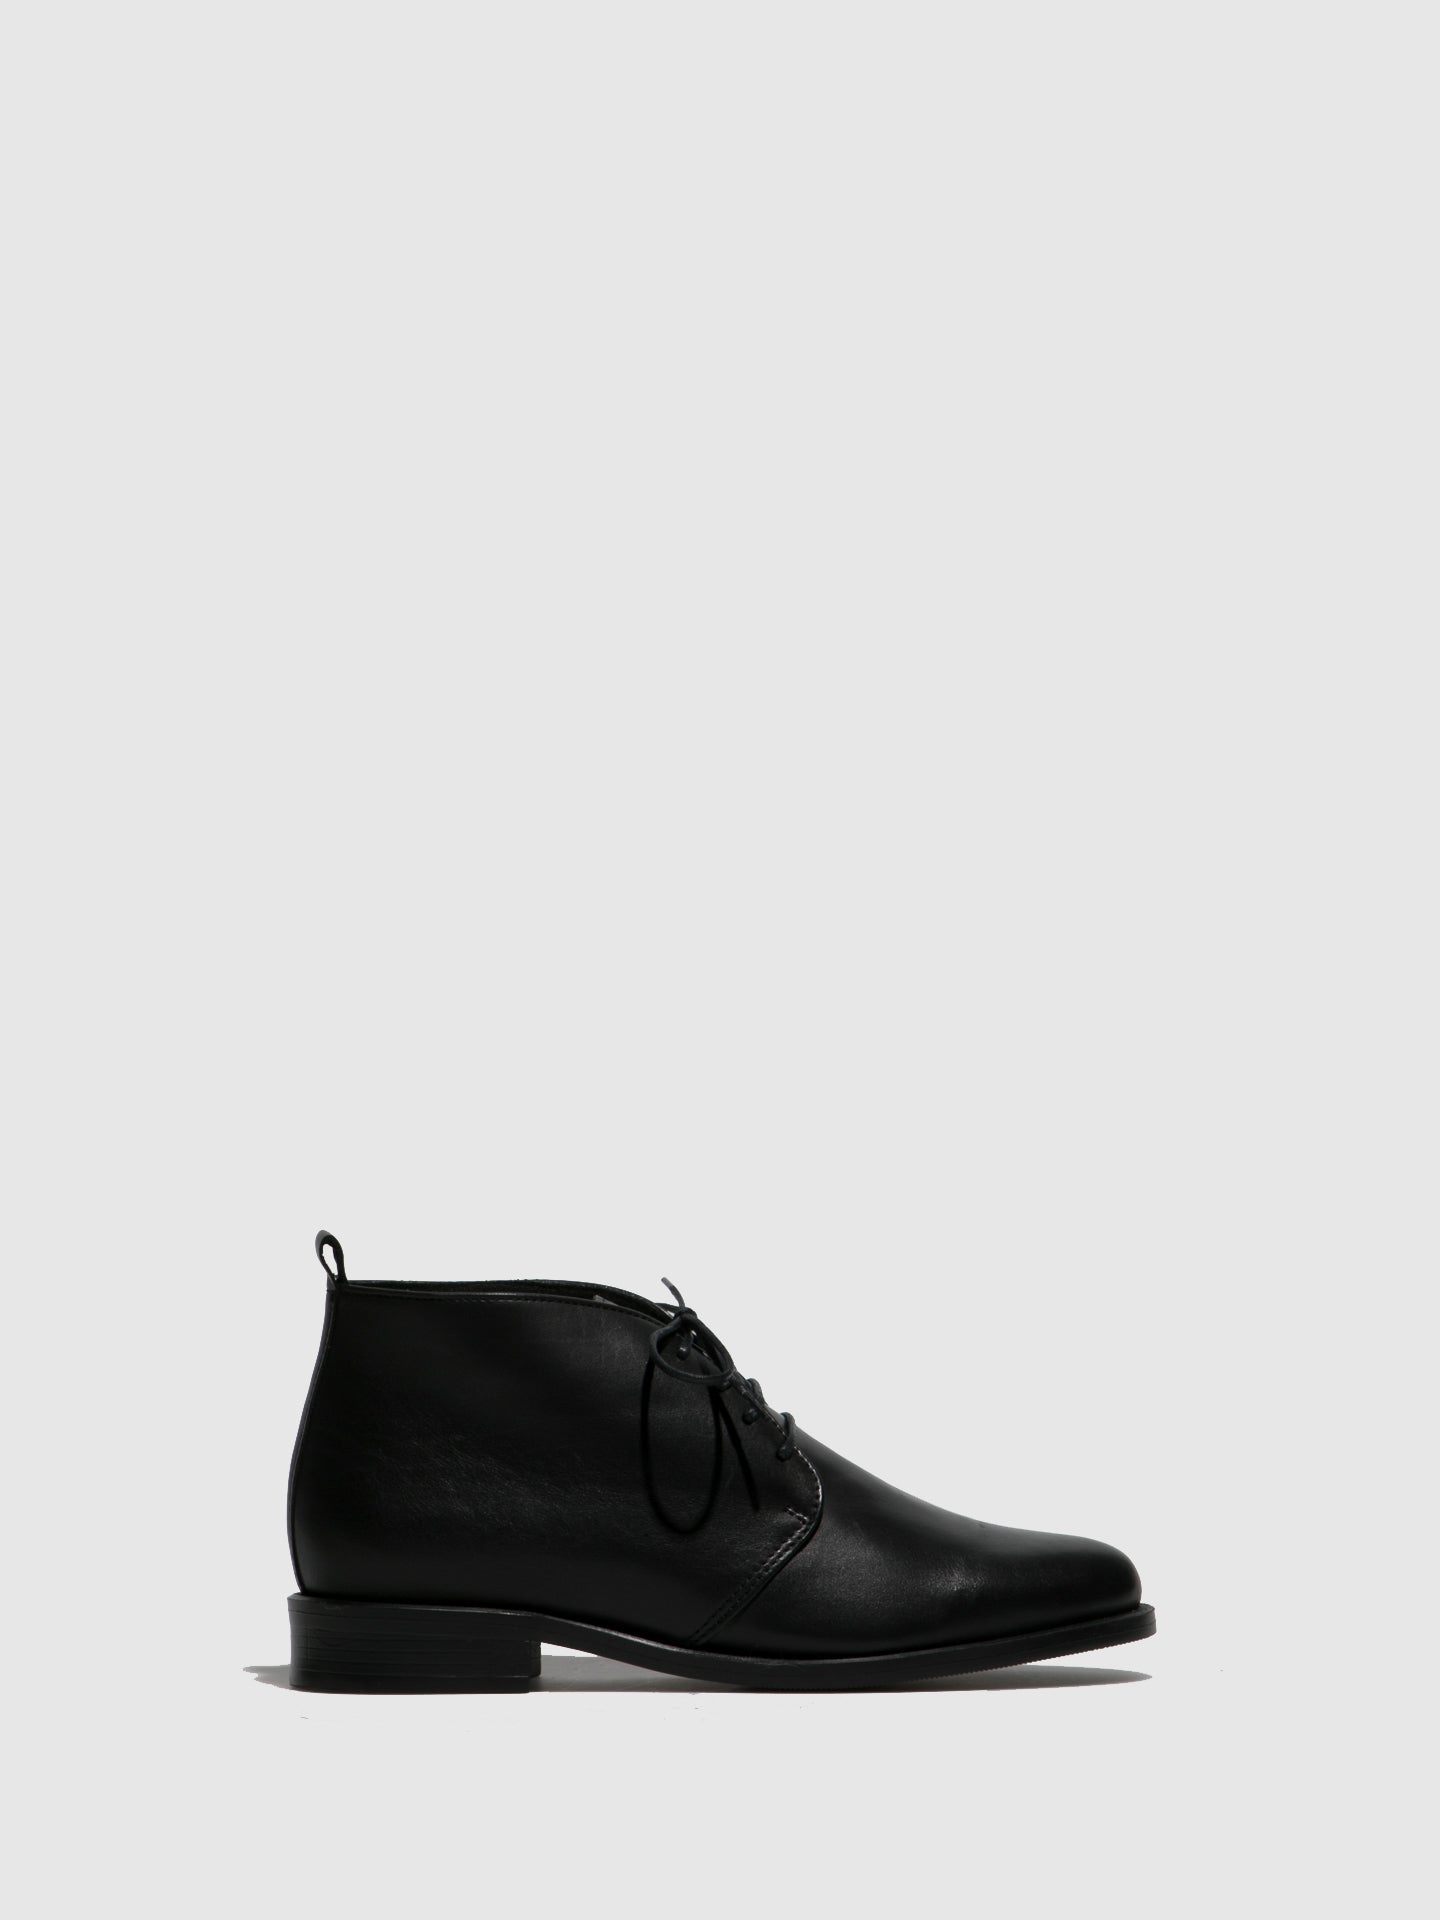 PintoDiBlu Black Leather Lace-up Ankle Boots